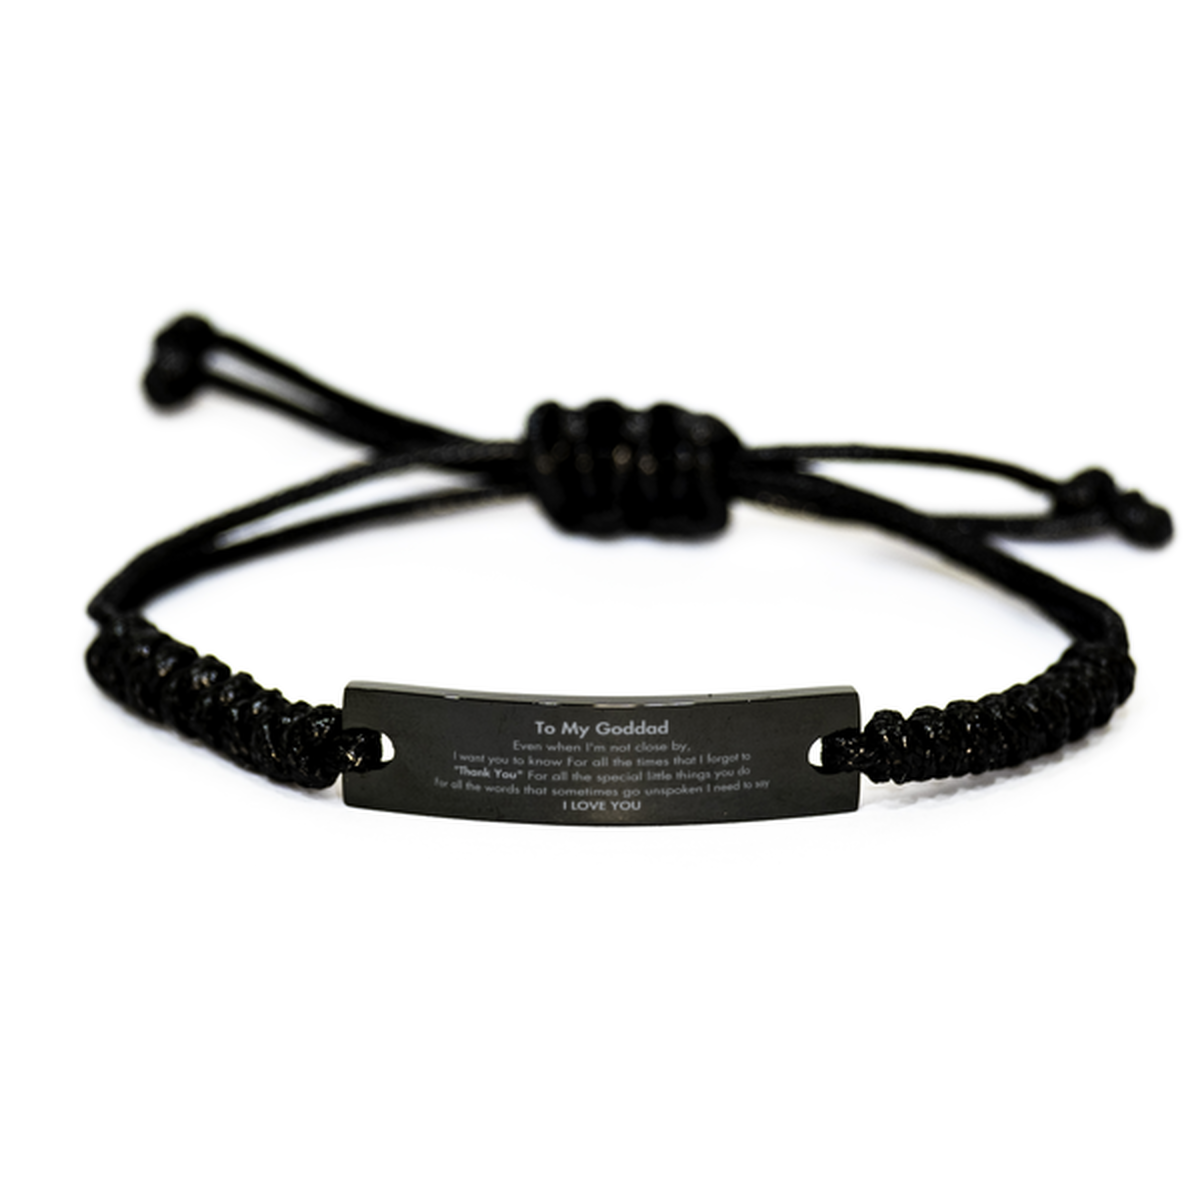 Thank You Gifts for Goddad, Keepsake Black Rope Bracelet Gifts for Goddad Birthday Mother's day Father's Day Goddad For all the words That sometimes go unspoken I need to say I LOVE YOU